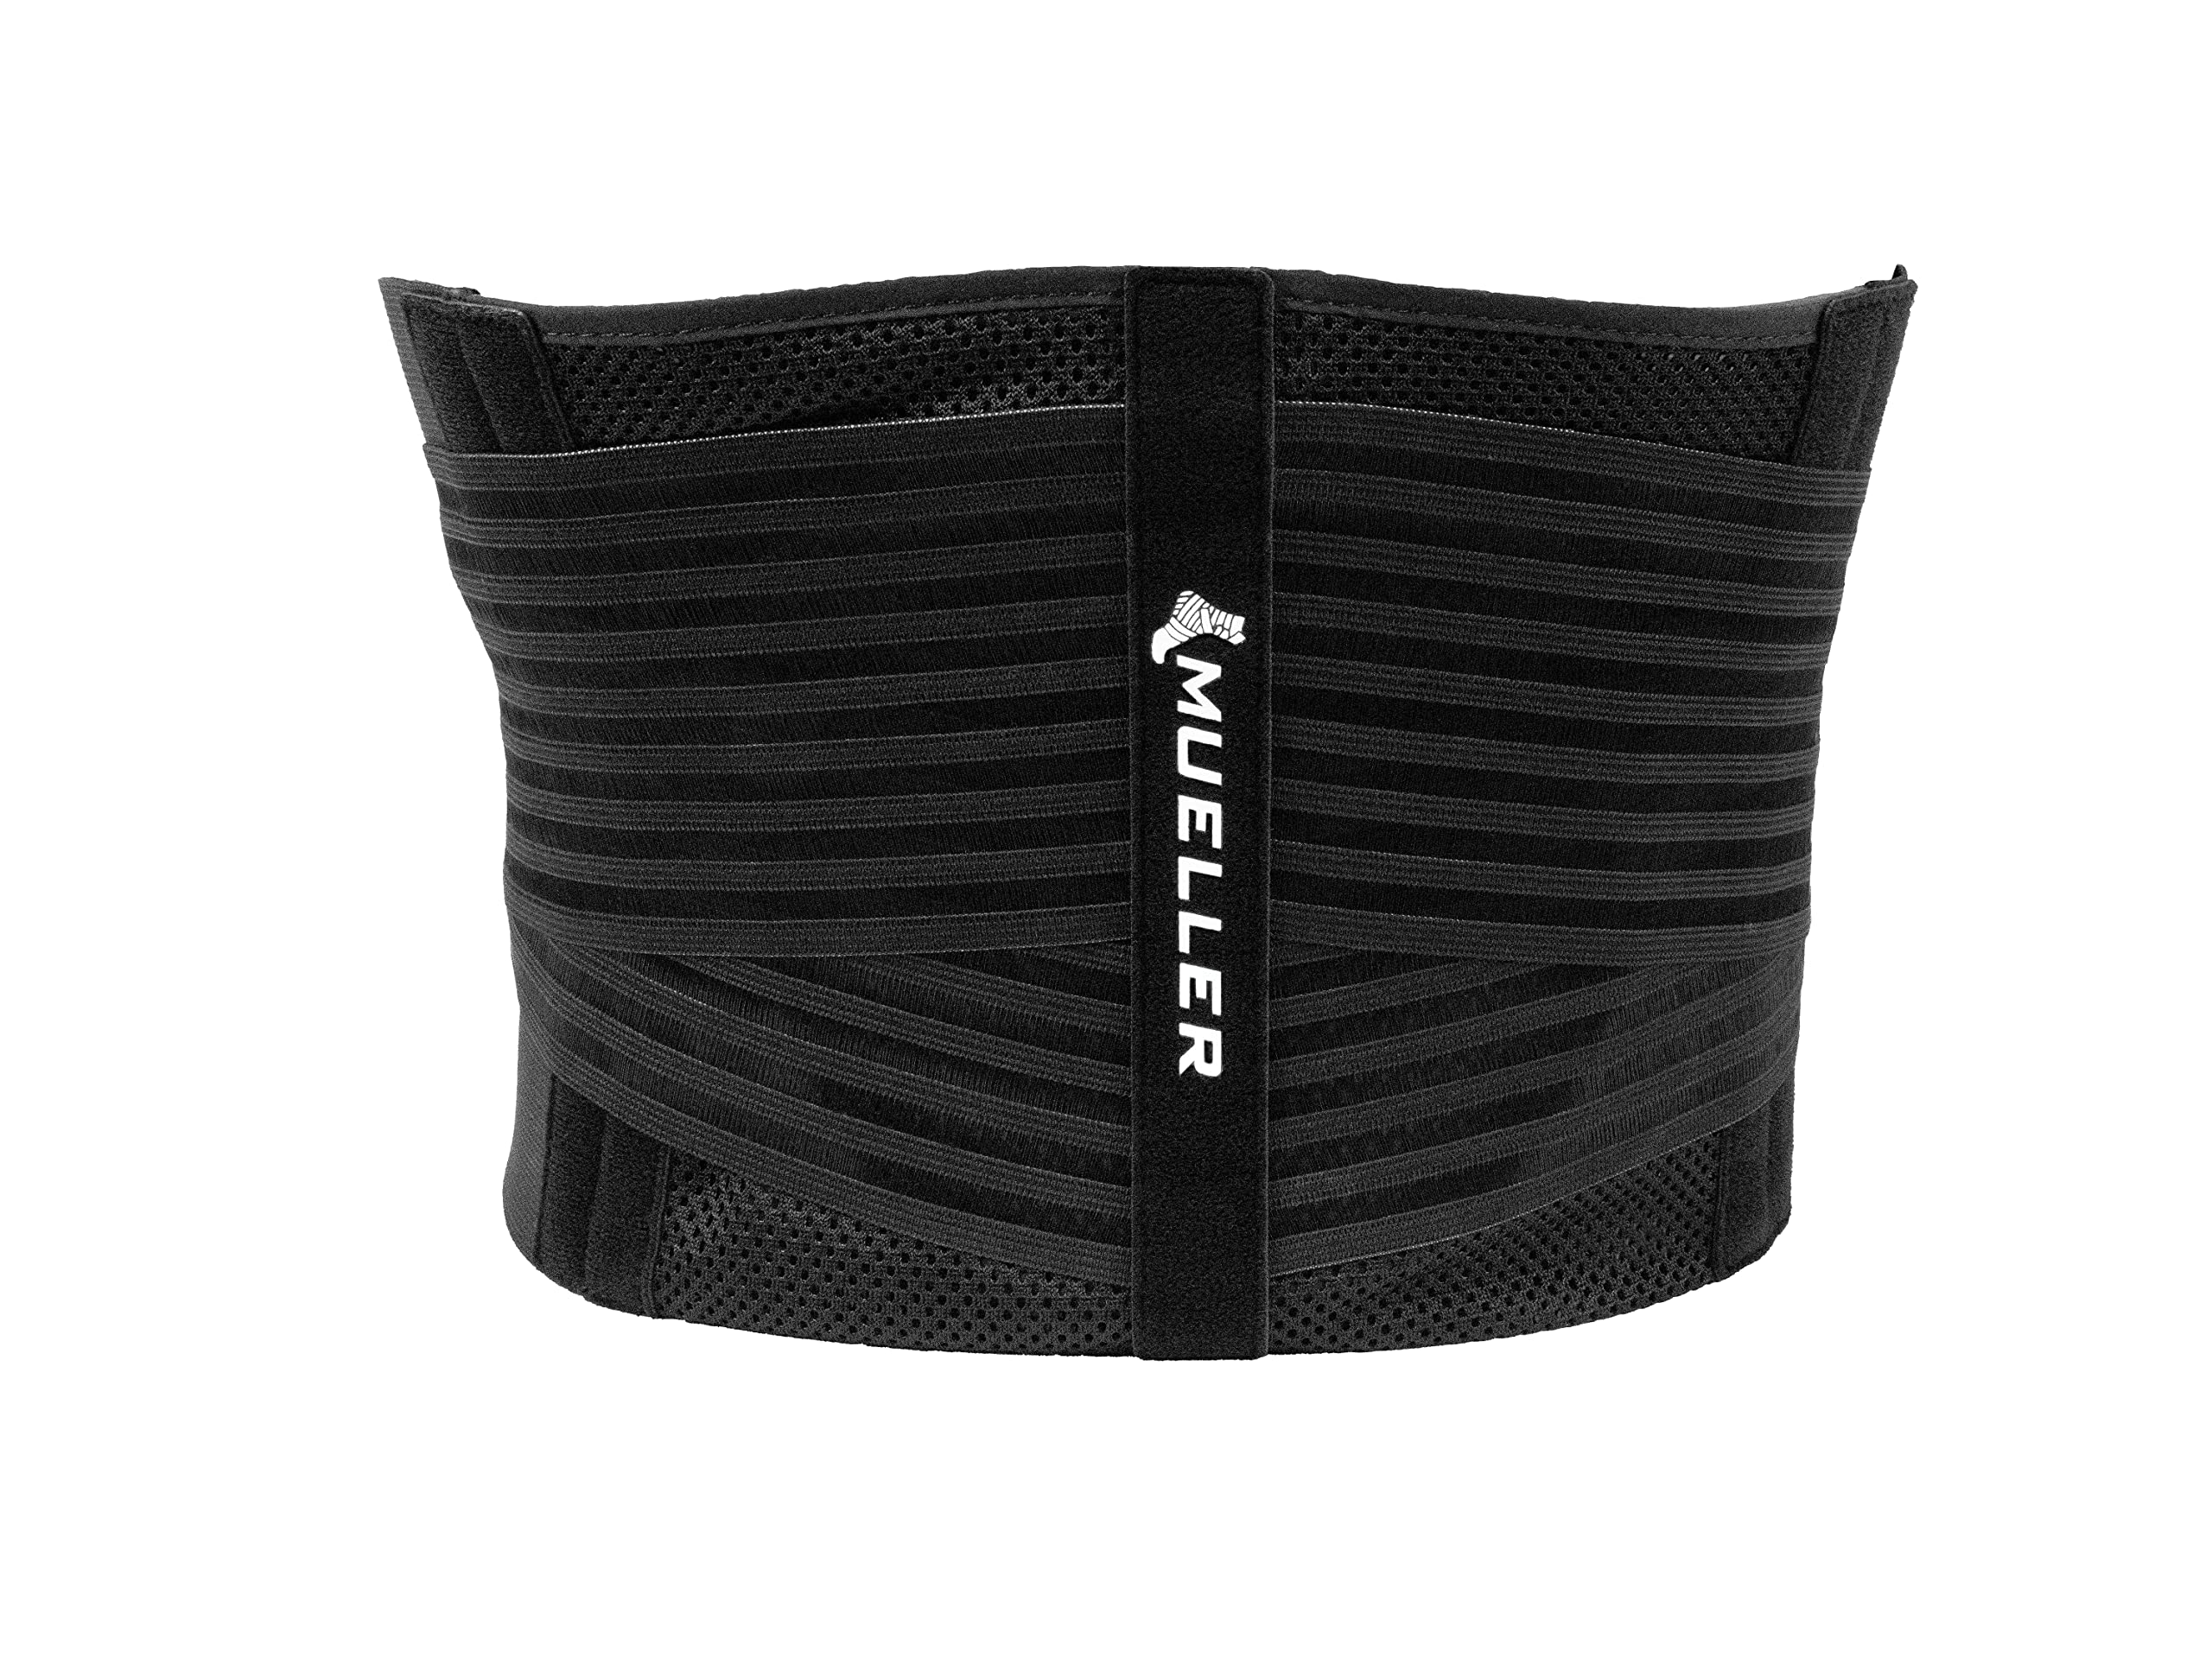 Mueller Sports Medicine 4-in-1 Lumbar Back Brace with Removable Hot/Cold Pack, for Men and Women, Black, One Size